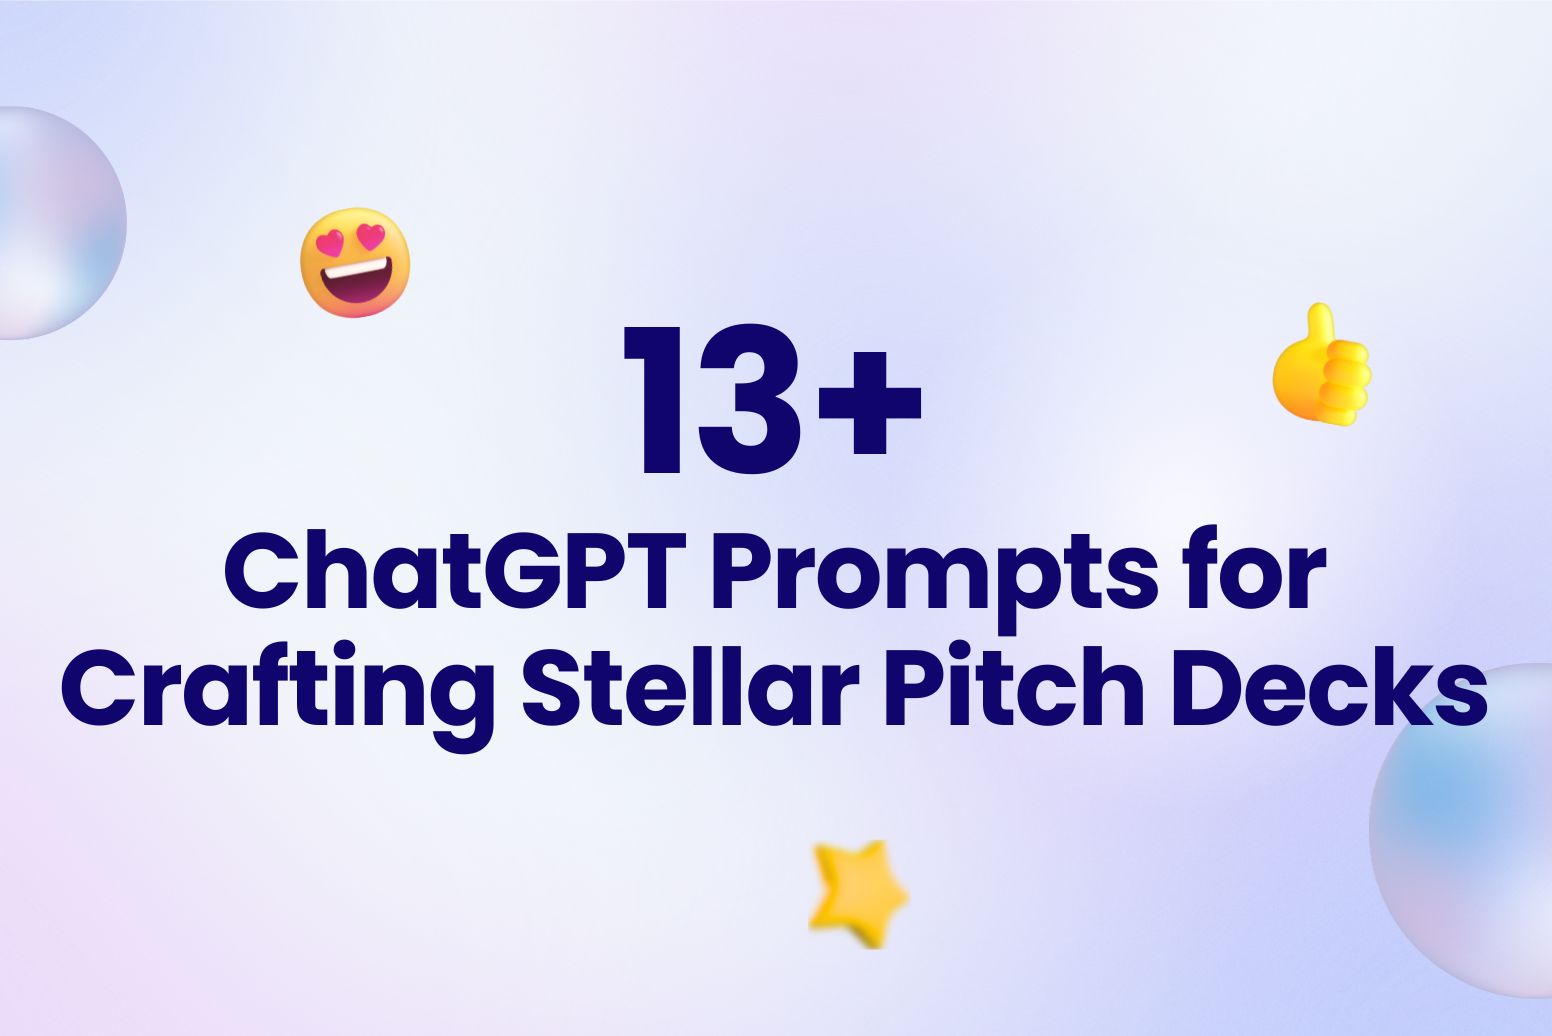 13+ ChatGPT Prompts for Crafting Stellar Pitch Decks